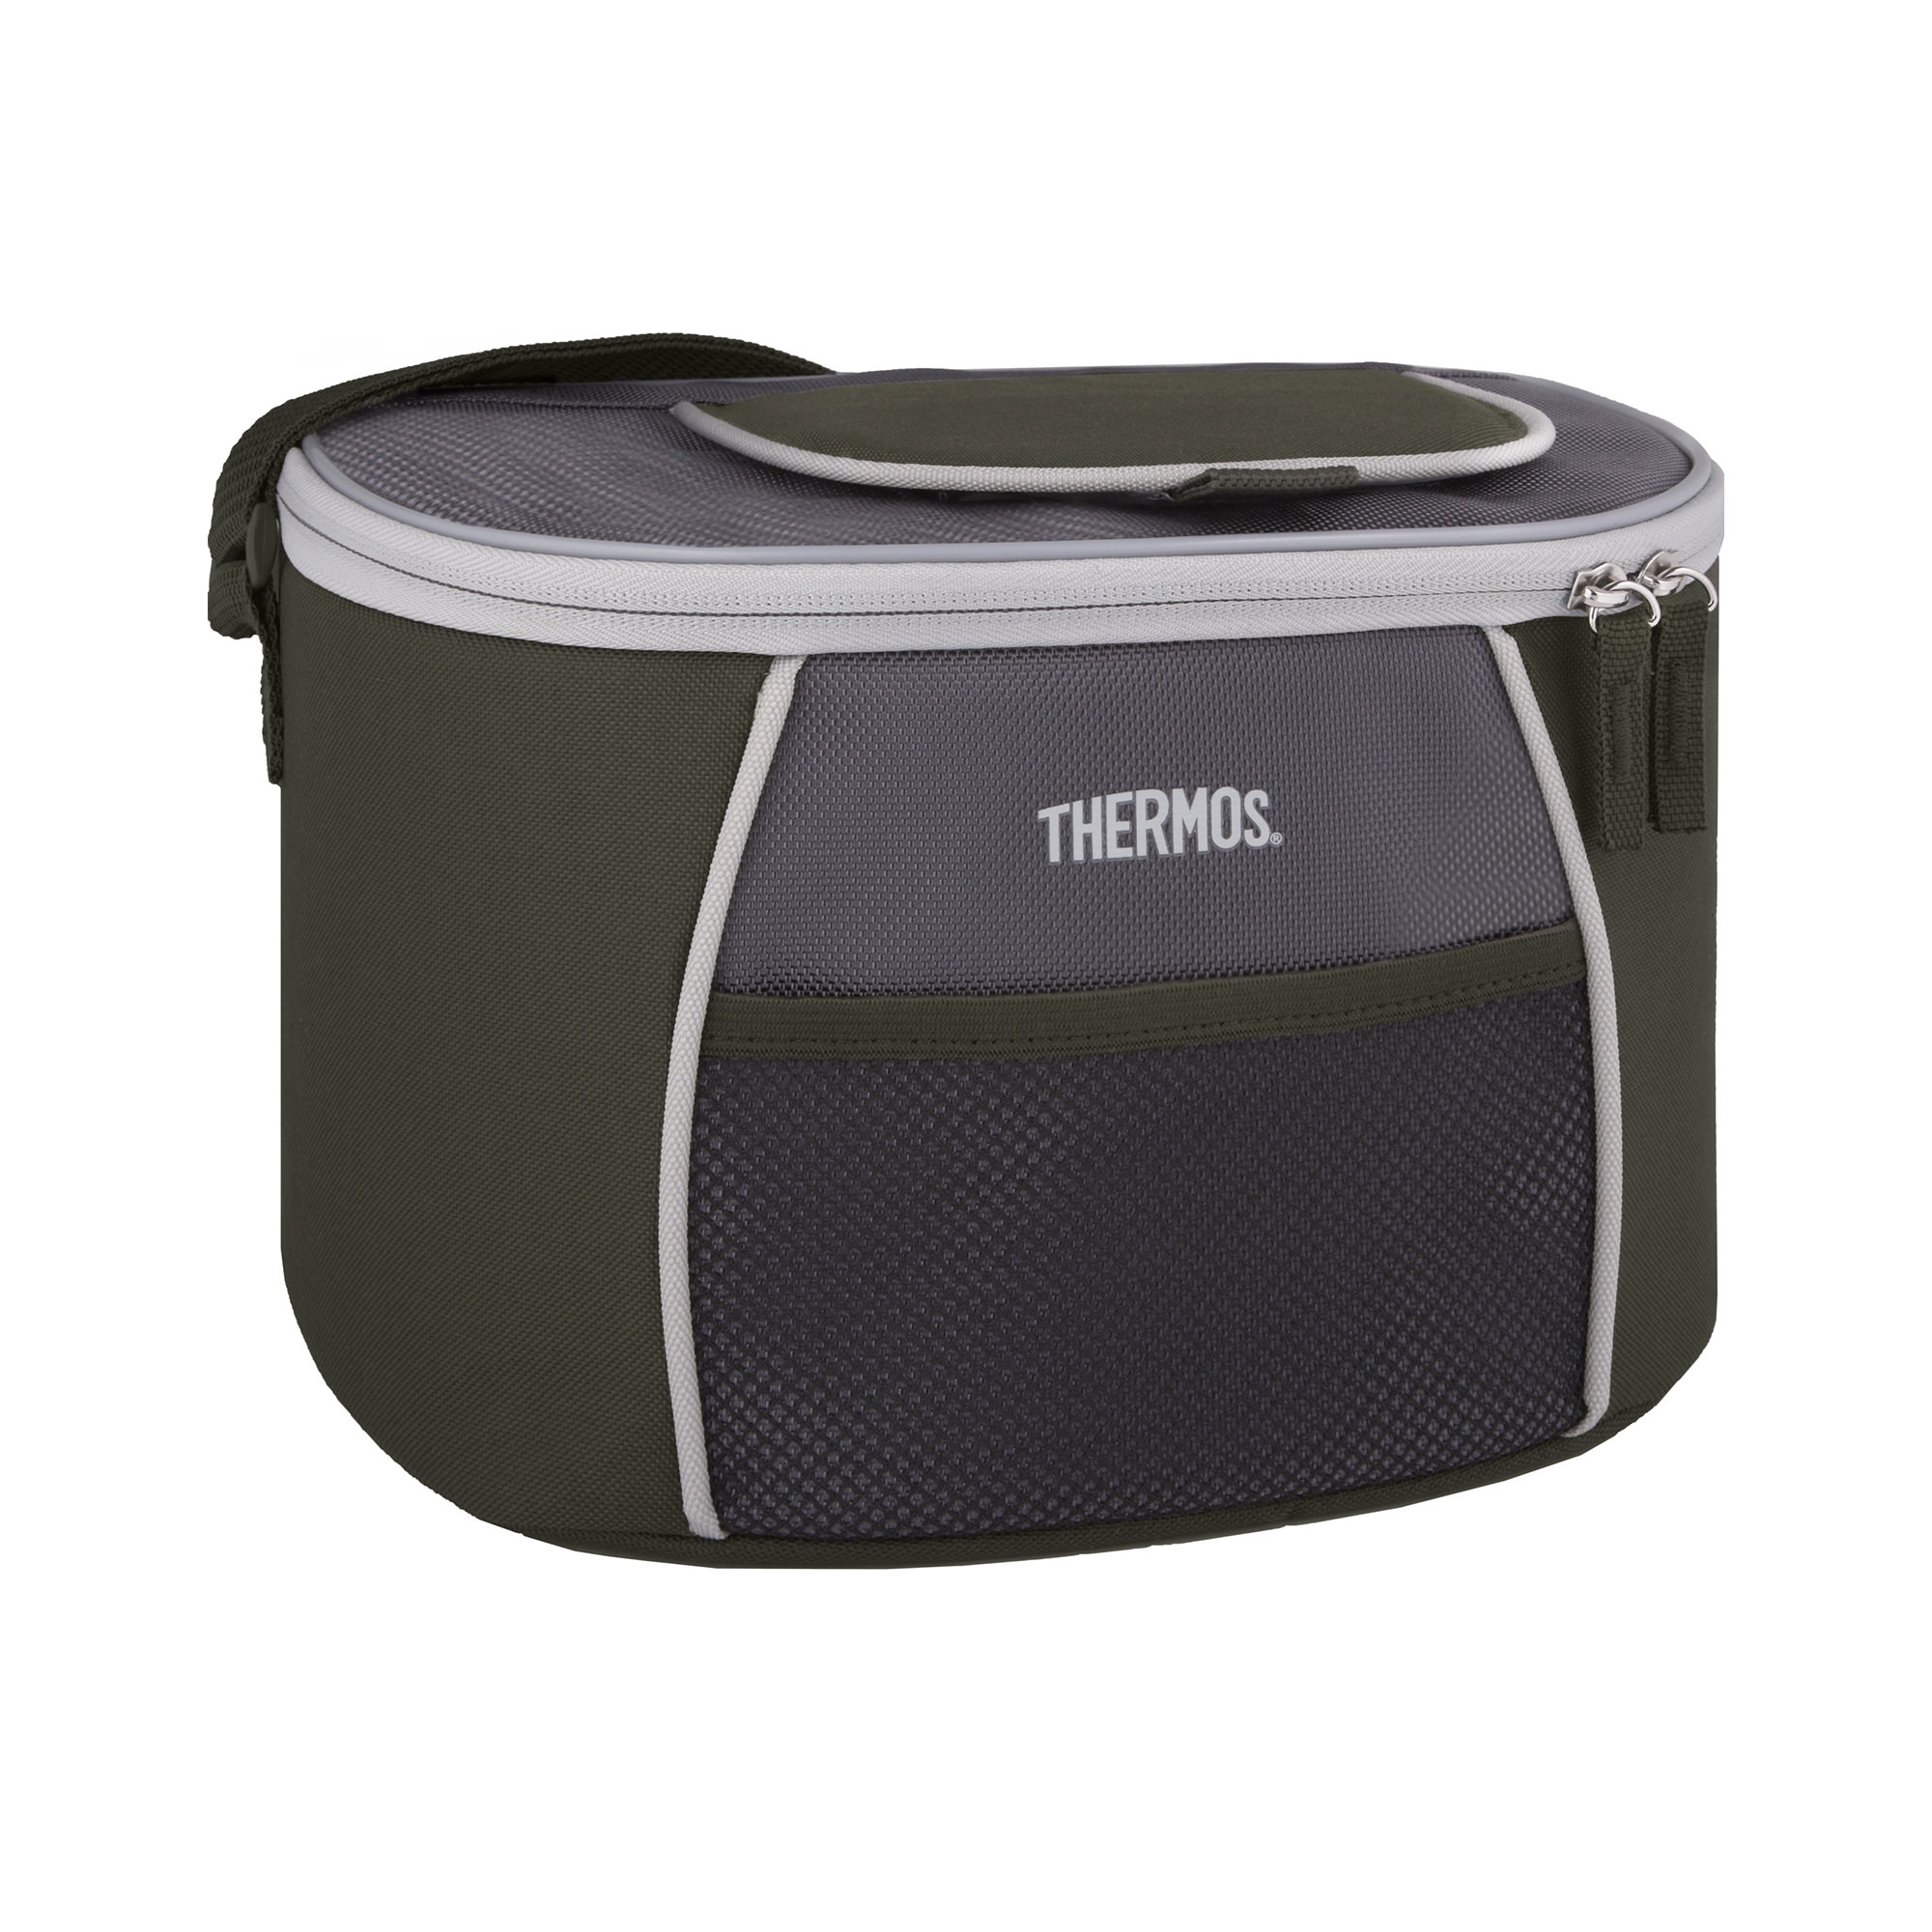 Thermos E5 Insulated Cooler 6 Can Image 1